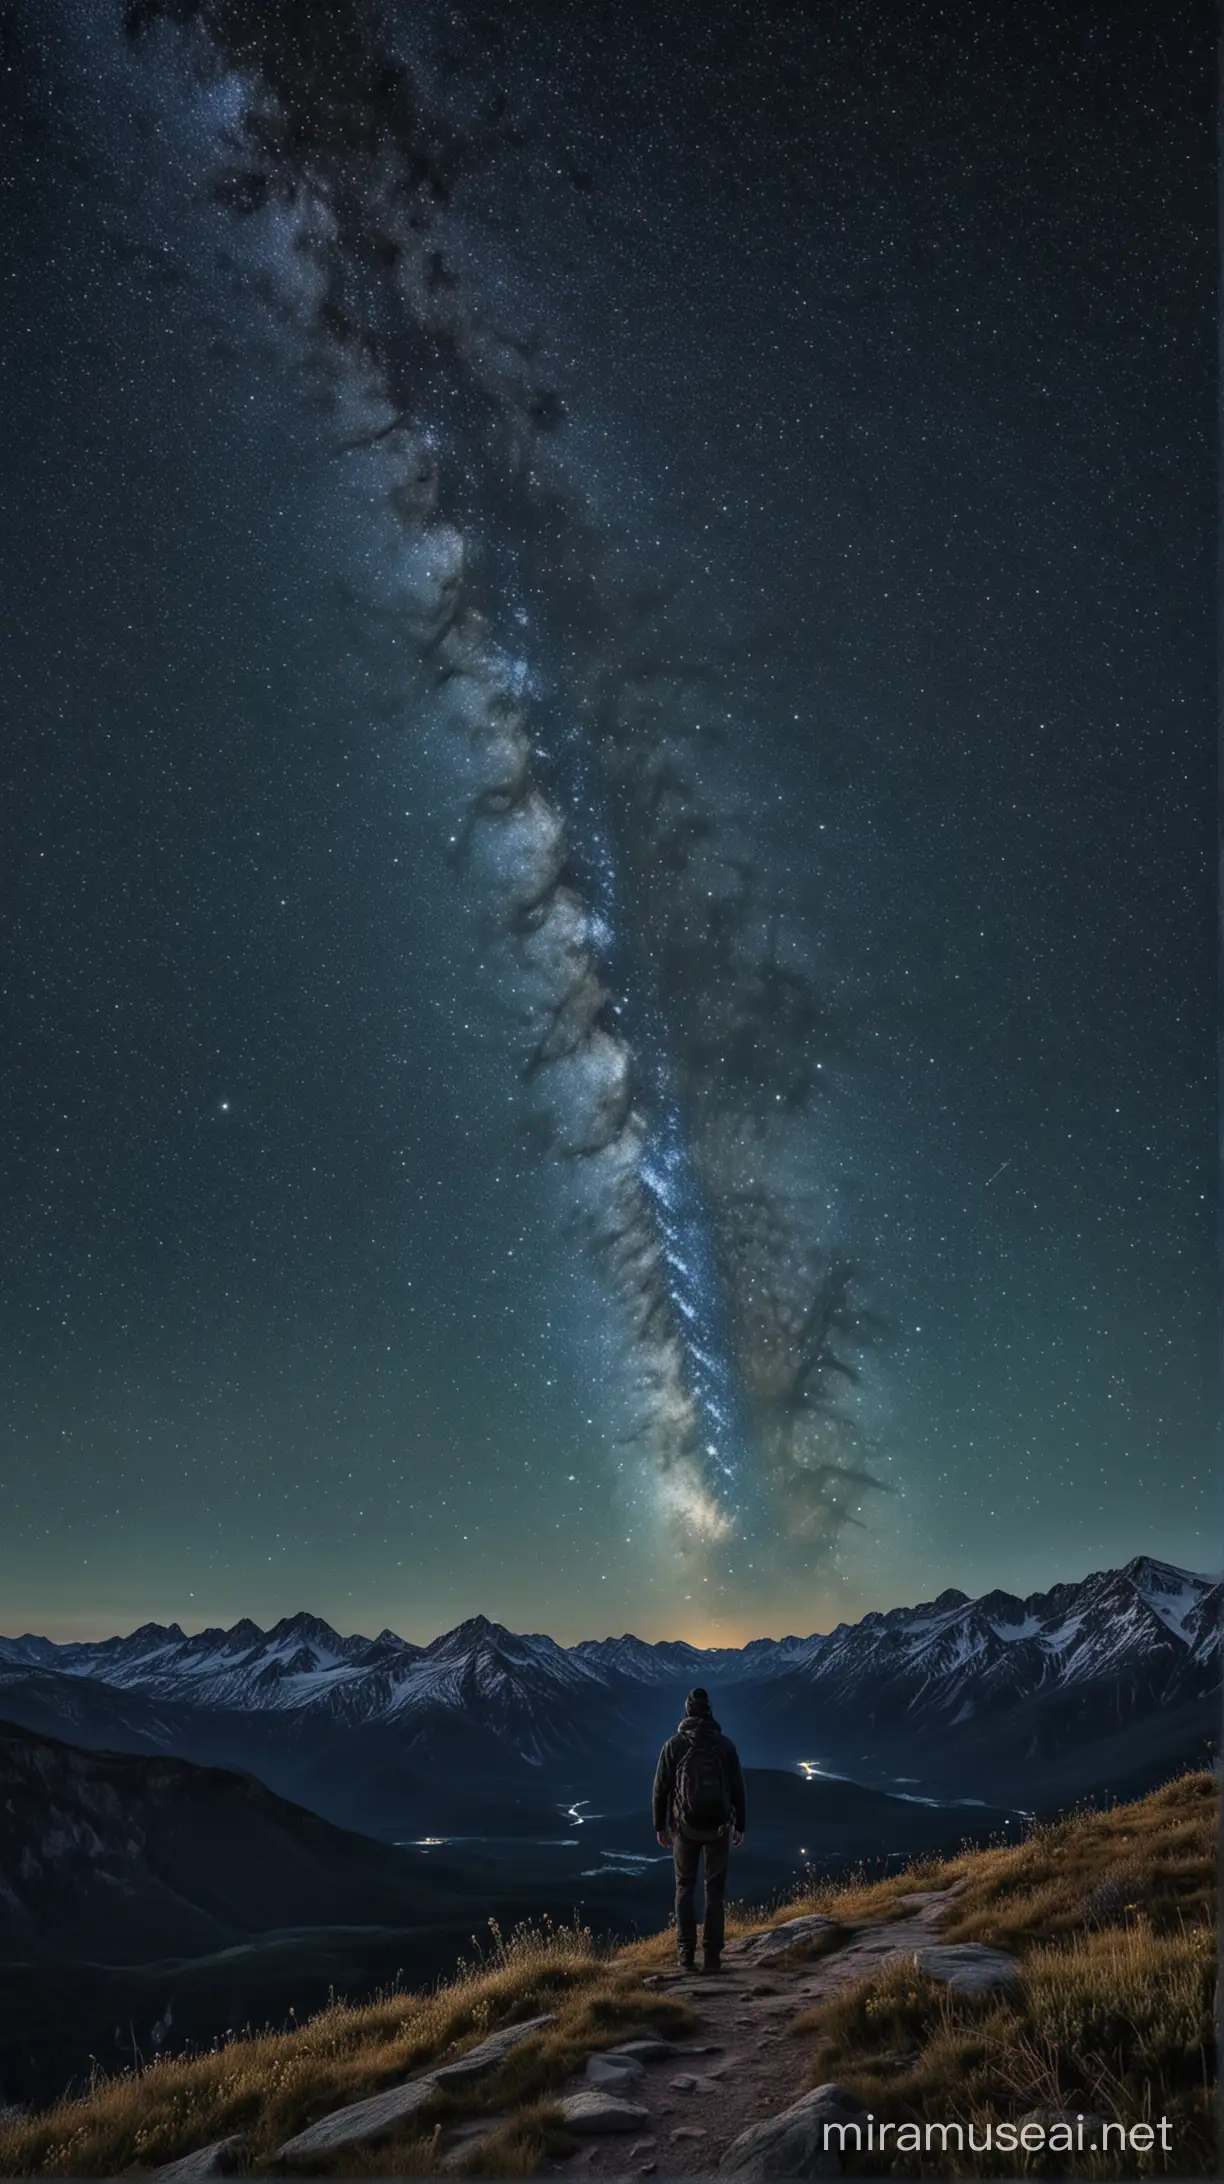 In the quiet stillness of the night, a lone hiker gazes up at the breathtaking display of stars spread across the dark canvas of the sky from the mountain peak. The stars twinkle like diamonds, creating a celestial spectacle above. The hiker, wrapped in a cozy jacket, stands in awe of the cosmic beauty surrounding them. The image is rendered with a blend of deep blues and rich blacks, enhancing the contrast between the hiker and the starlit sky. Each star is meticulously detailed, adding a sense of magic and wonder to the scene. The mood is one of introspection and reverence, as the hiker finds solace in the vastness of the universe 